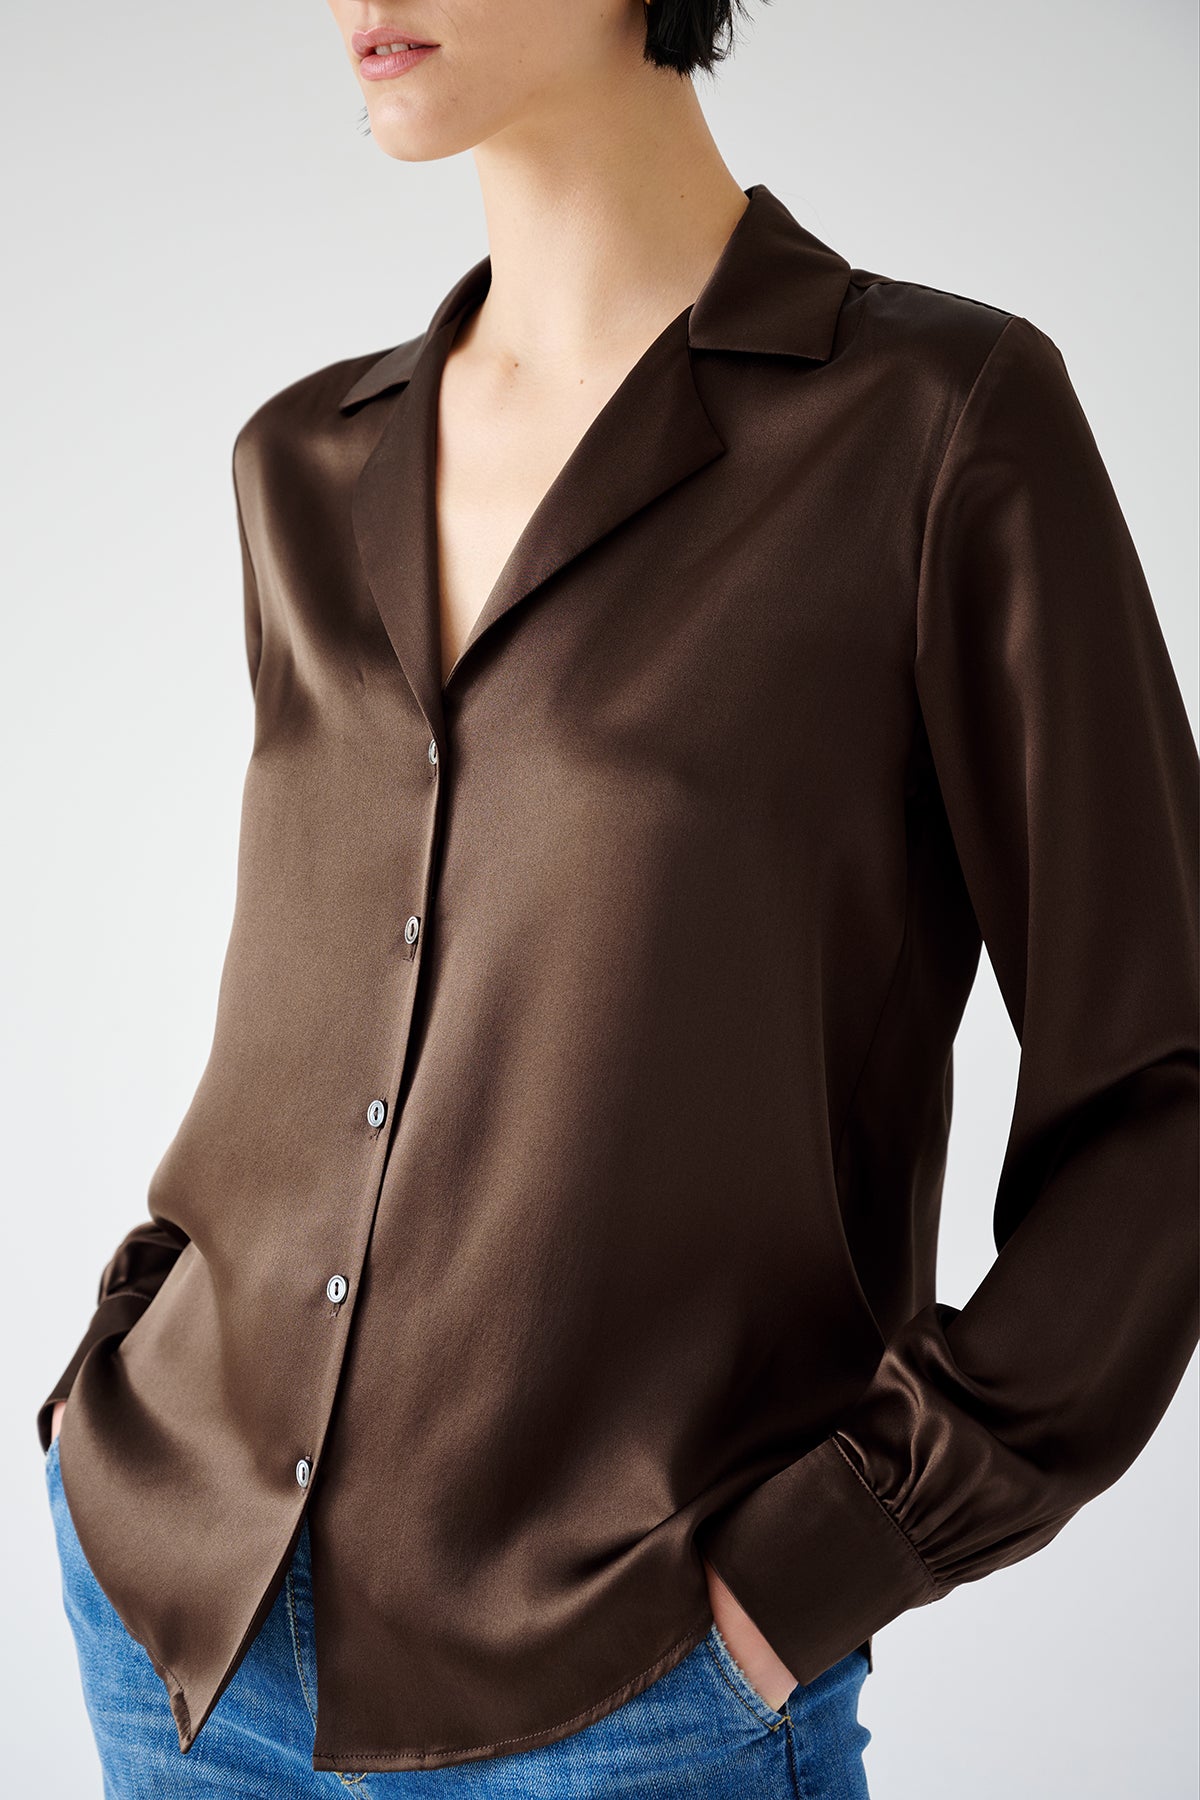   The model is wearing a timeless SOHO TOP brown silk button-up blouse by Velvet by Jenny Graham. 